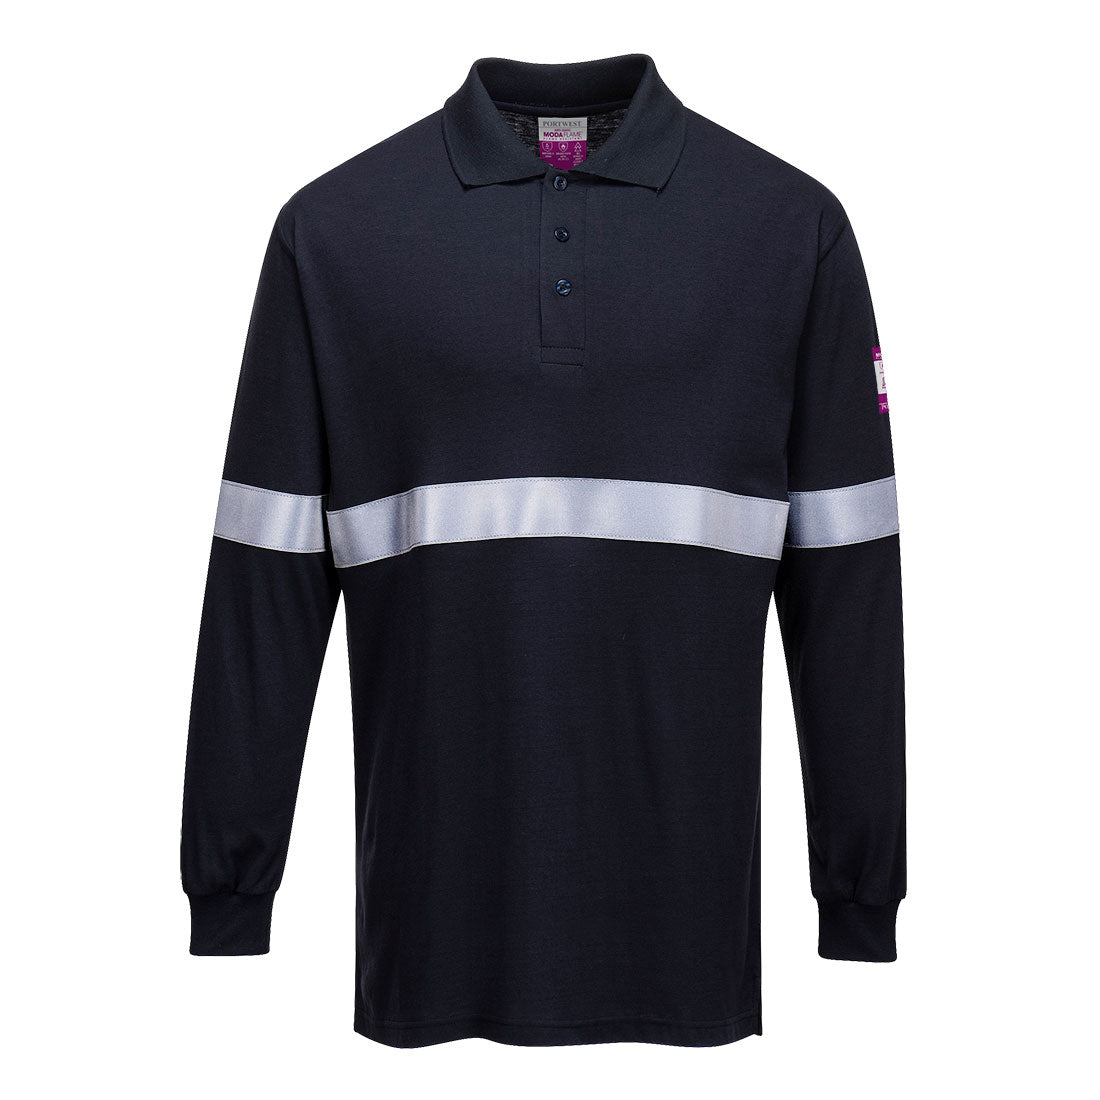 Flame Resistant Anti-Static Long Sleeve Polo Shirt with Reflective Tape - arbeitskleidung-gmbh